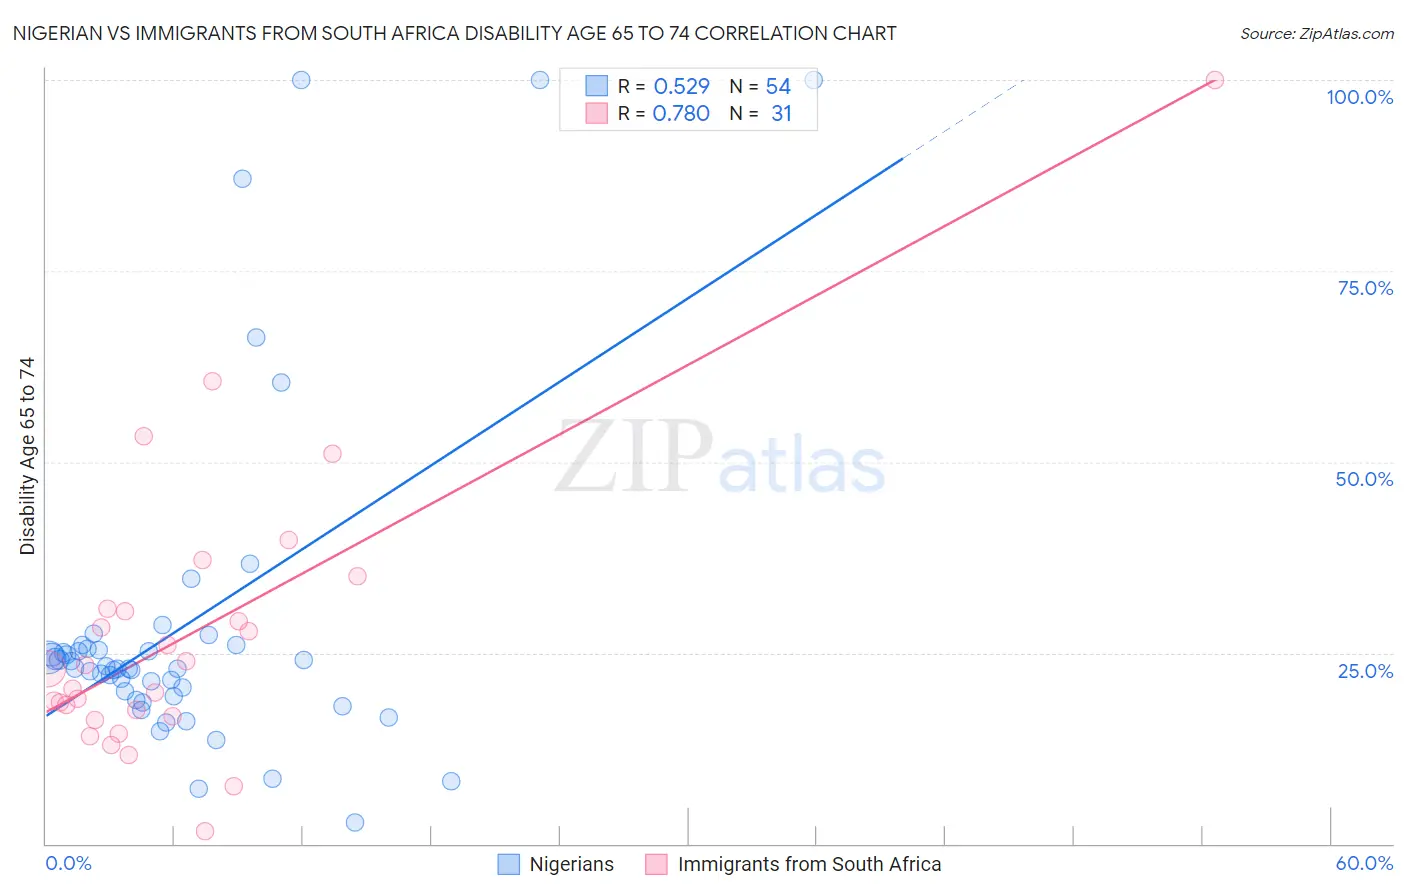 Nigerian vs Immigrants from South Africa Disability Age 65 to 74